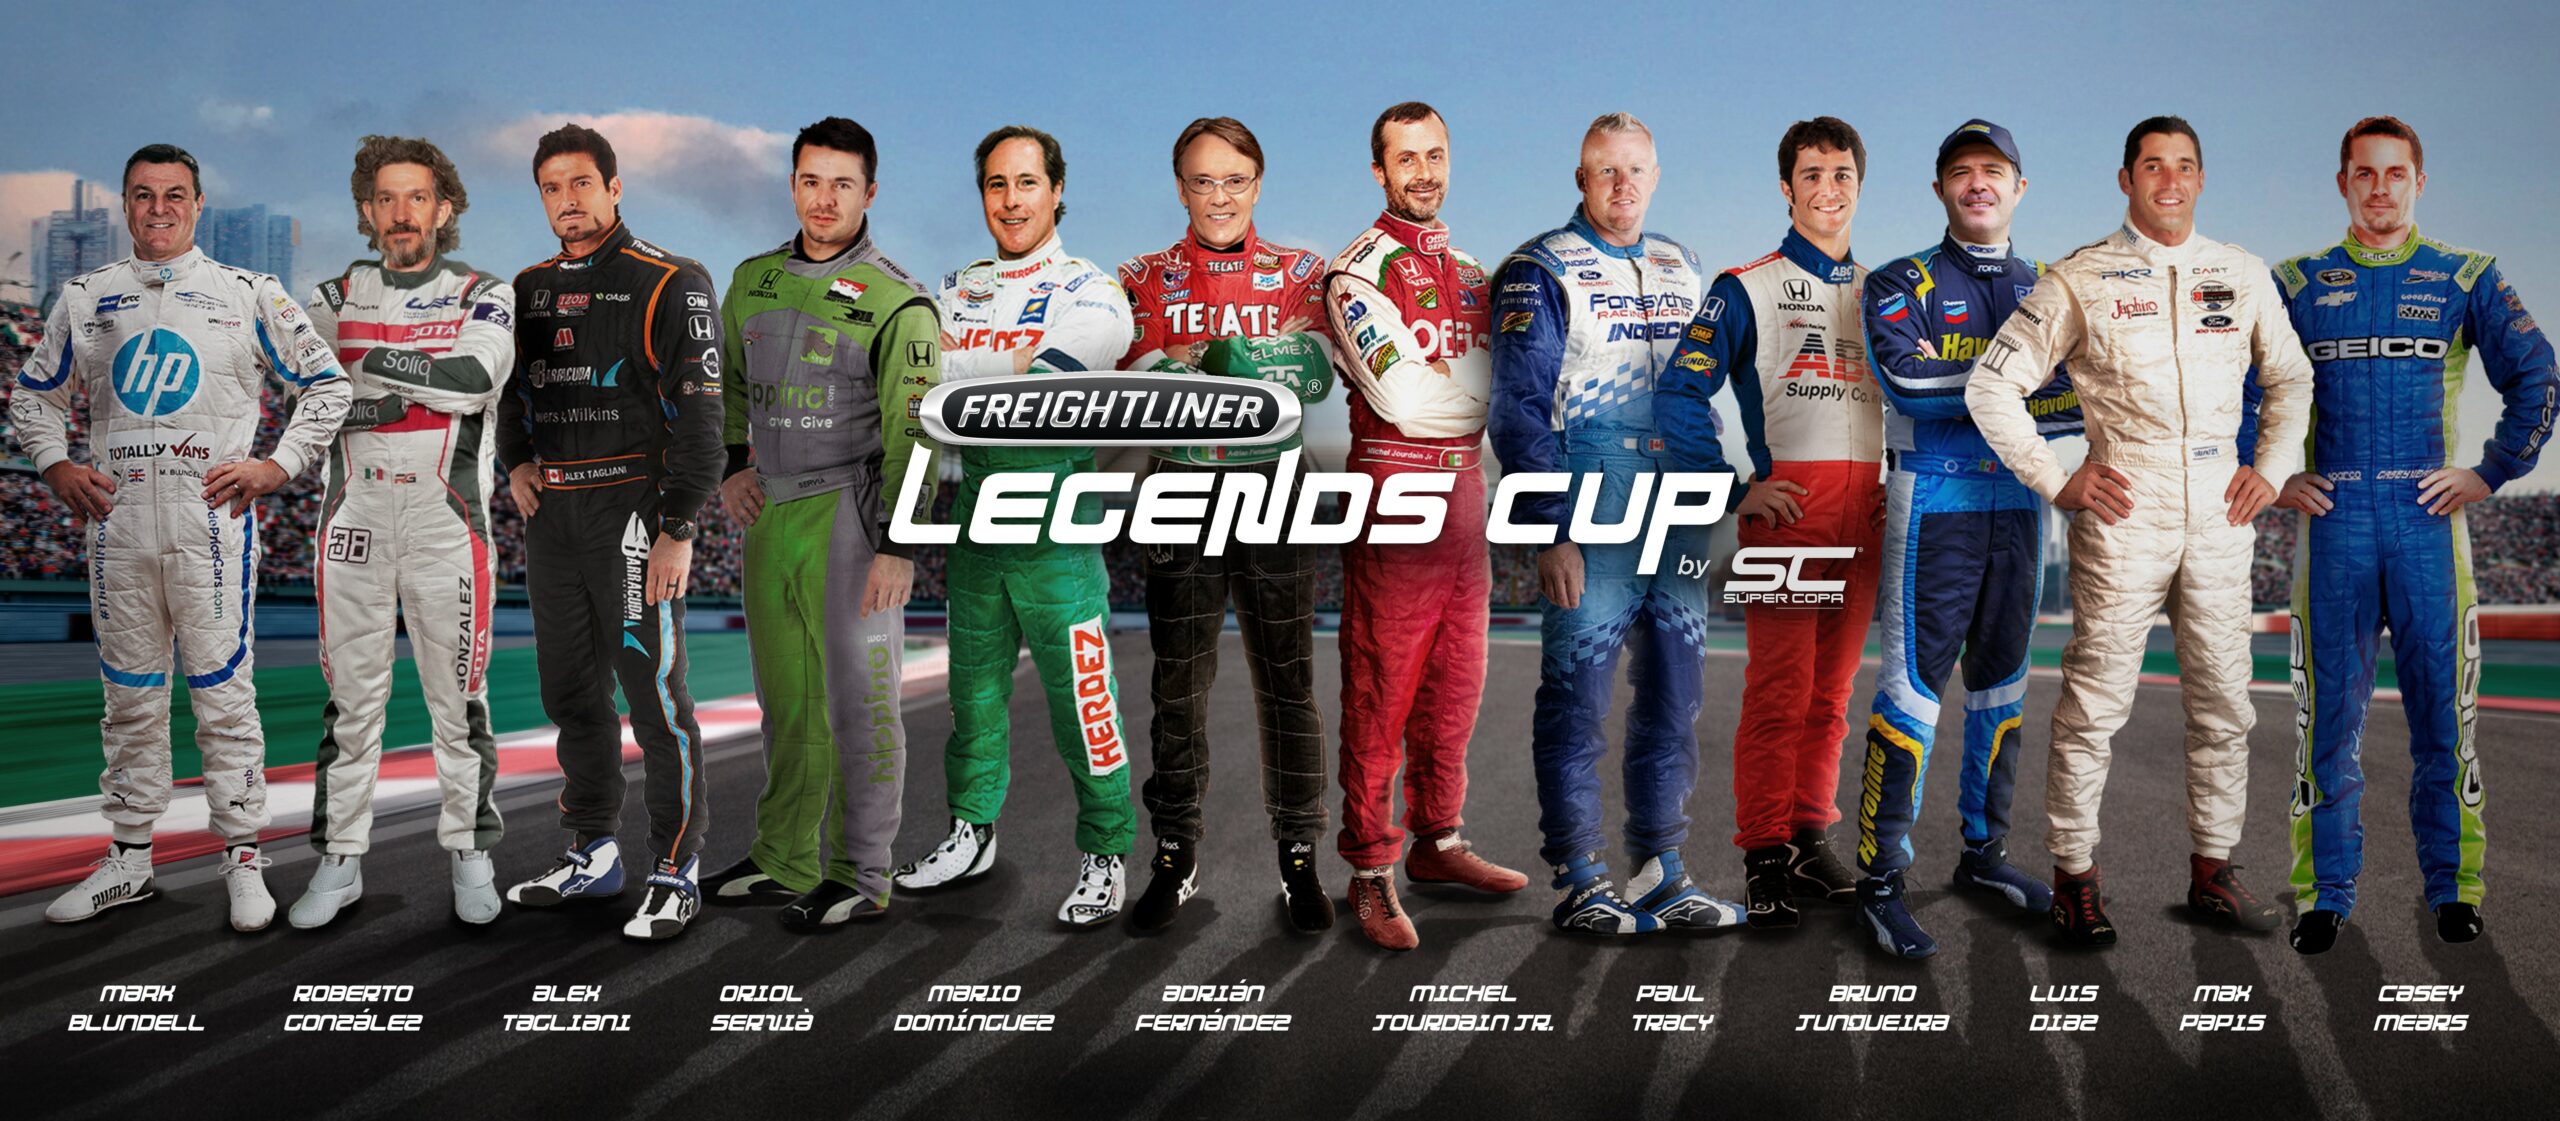 Former Indy legends reunite for a only race in spectacular